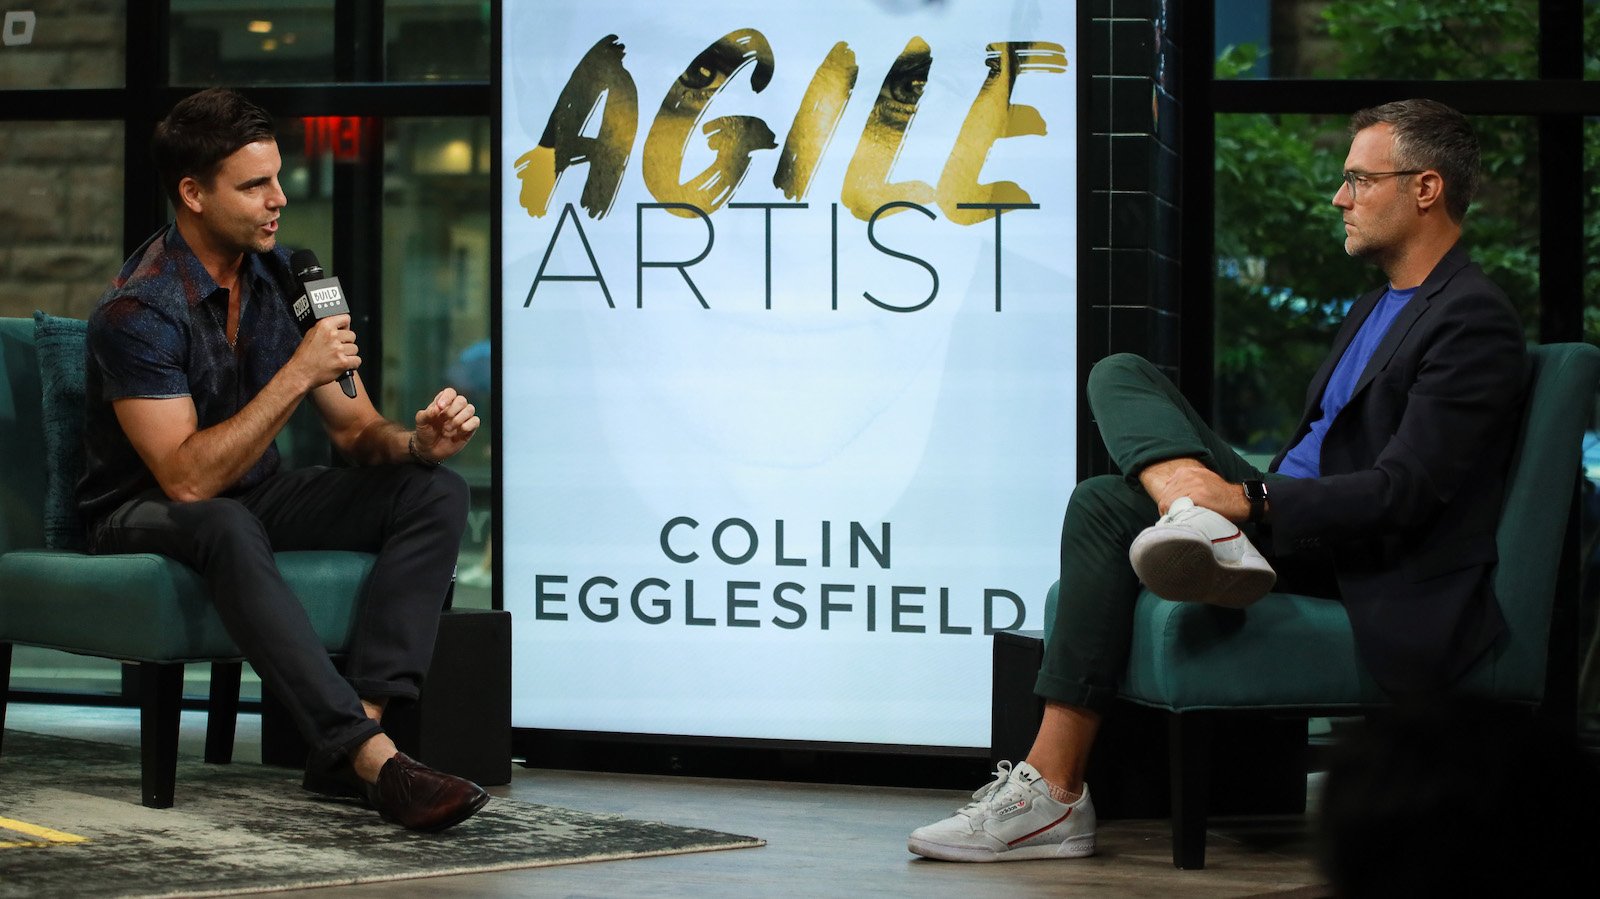 Colin Egglesfield sits with a microphone and talks about his book at Build Studio